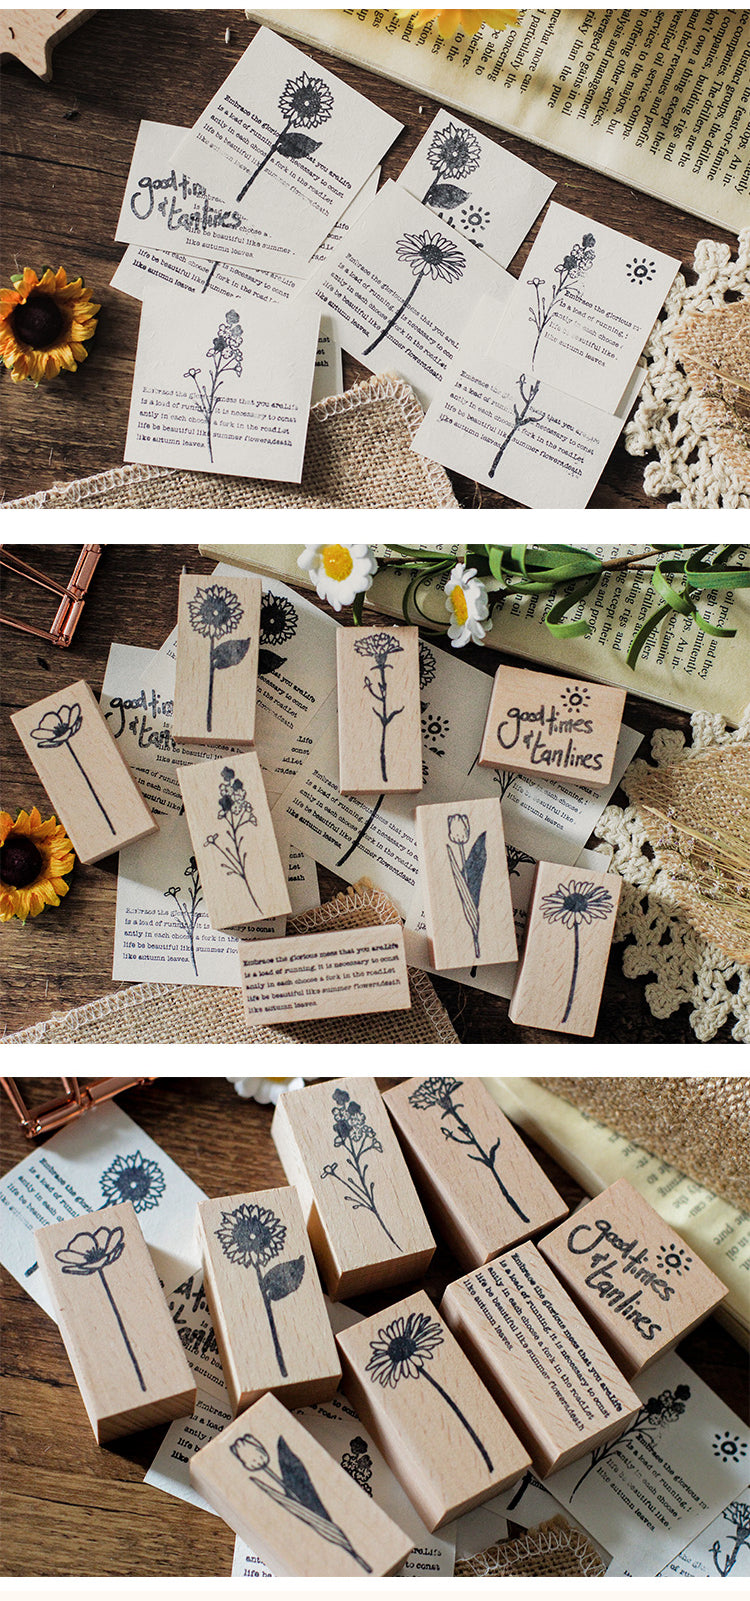 5Product Display of Vintage Flower & Text Wooden Rubber Stamp2